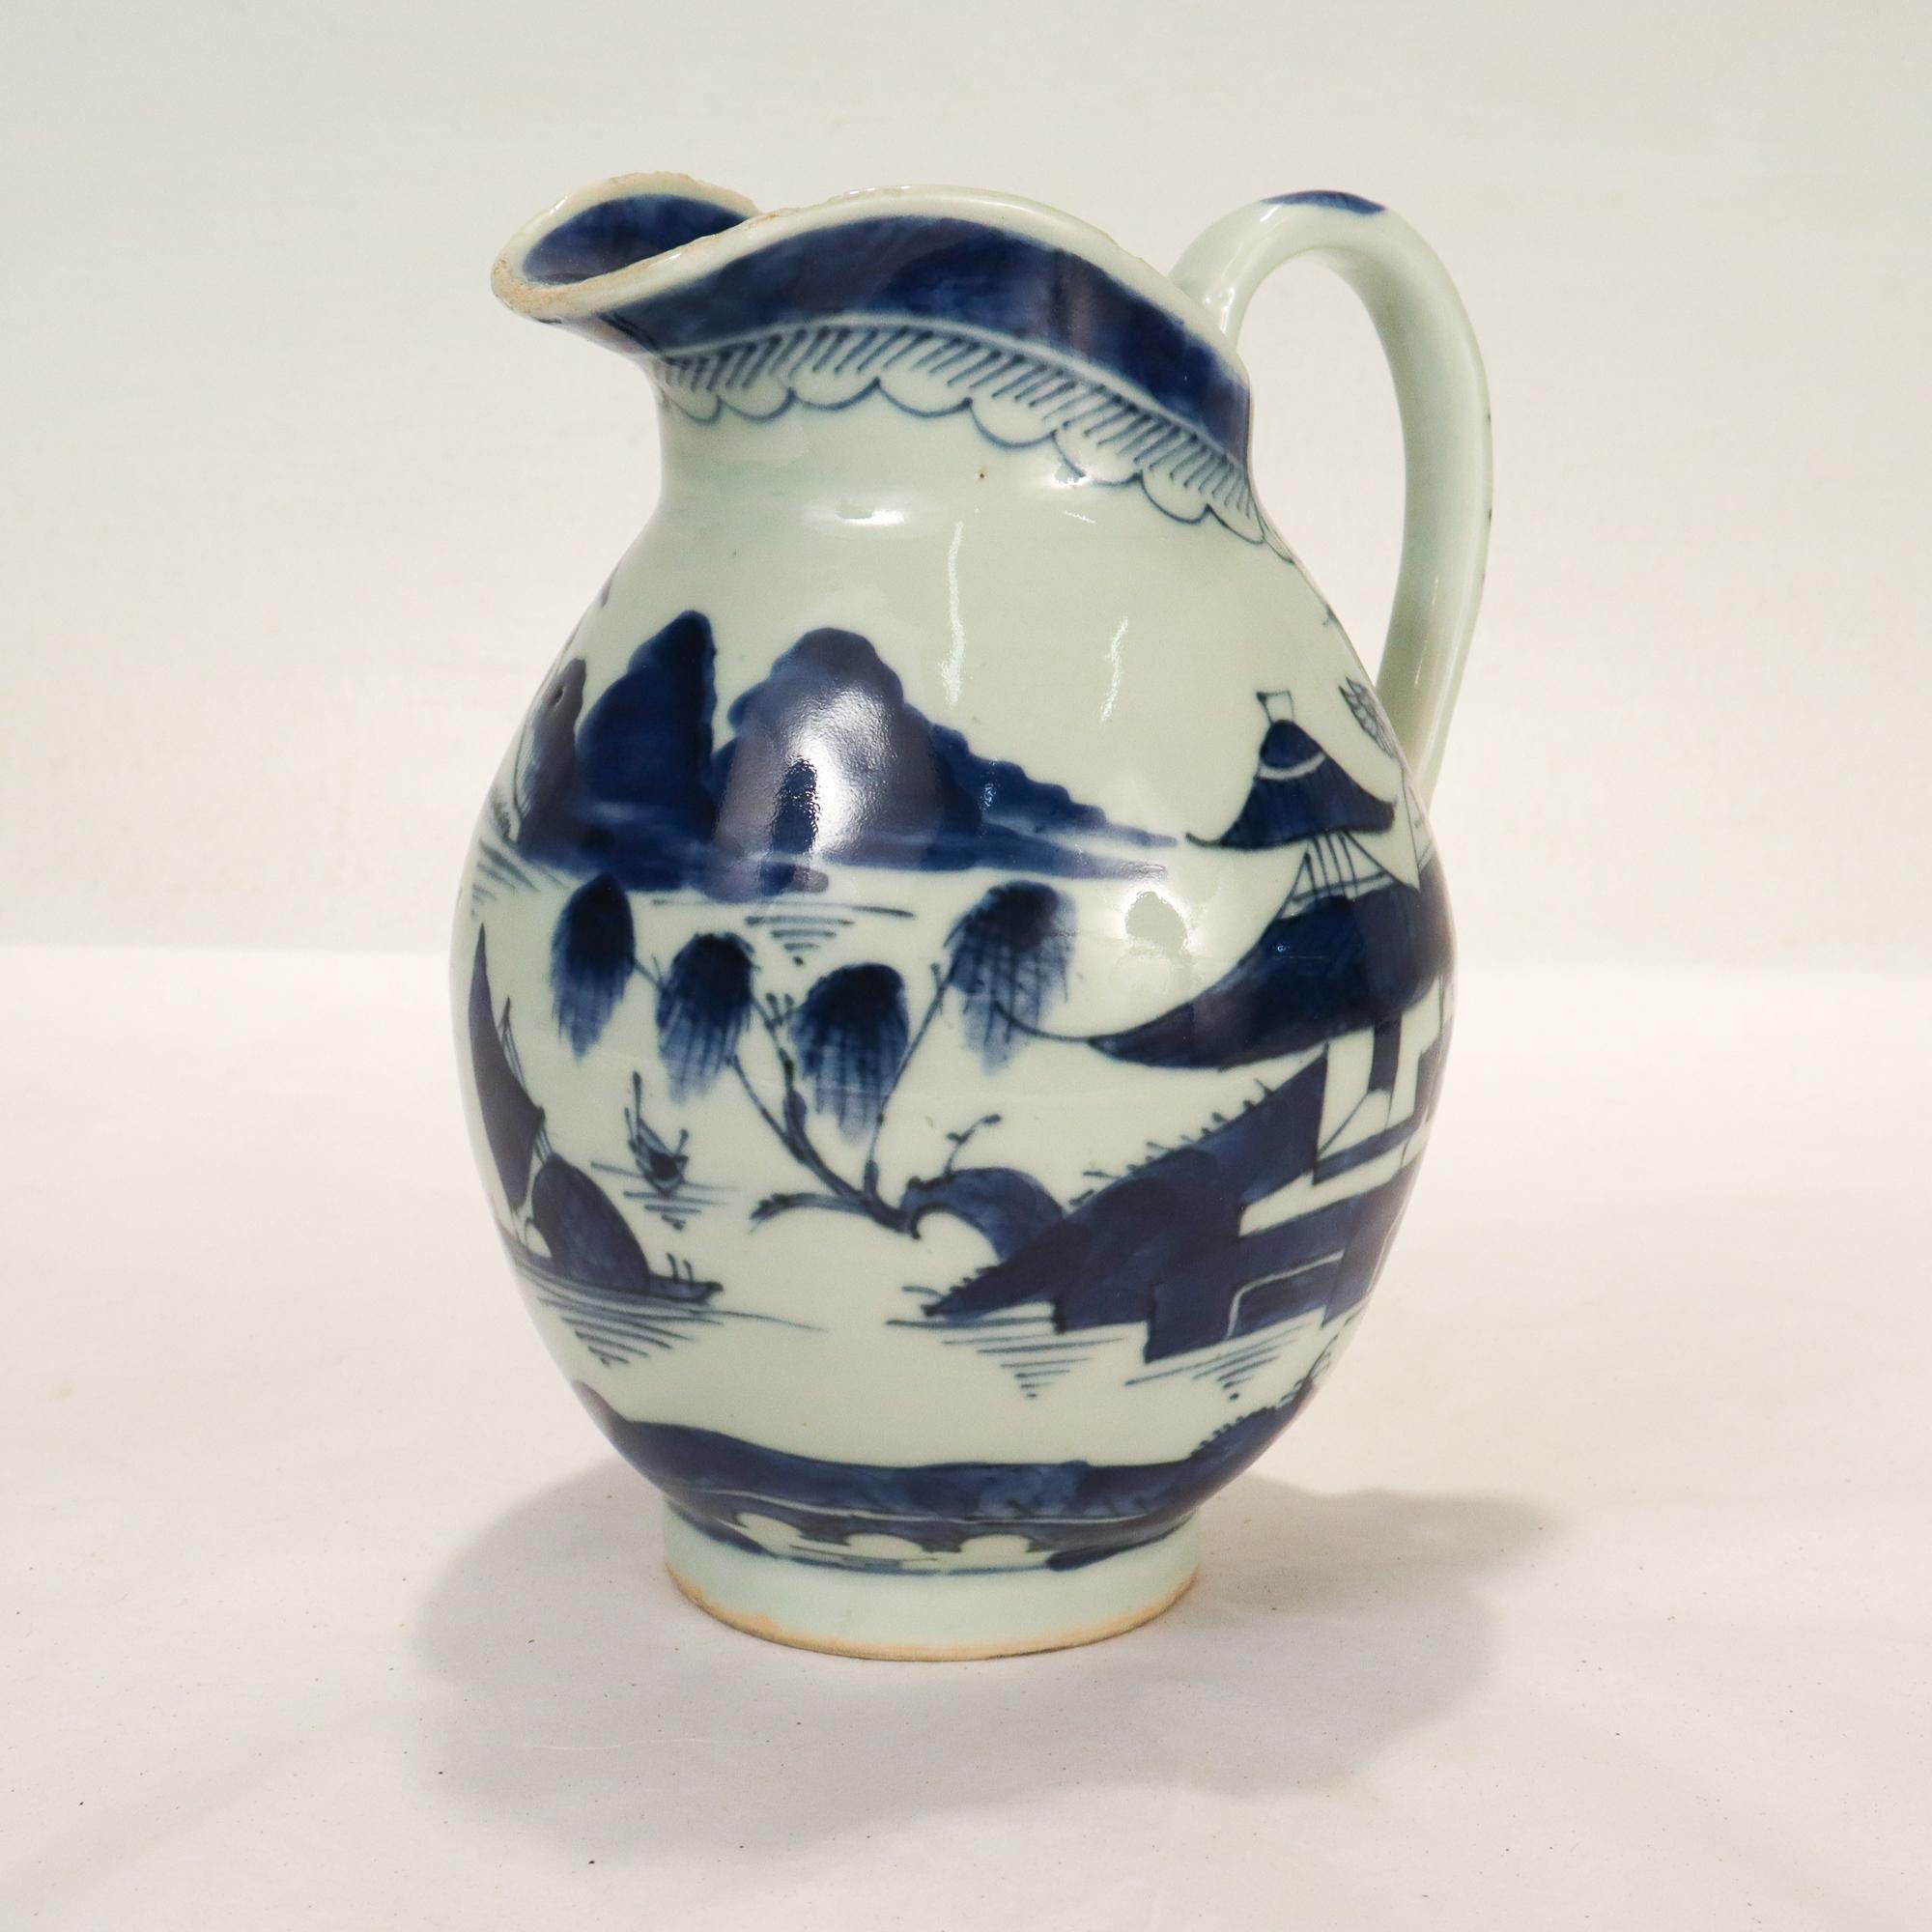 A fine Canton Chinese Export porcelain pitcher.

Decorated with blue underglaze throughout depicting a Chinese village near the water, with a boat and foliage.

The handle is decorated with a flower, and the pitcher's rim has a blue border on